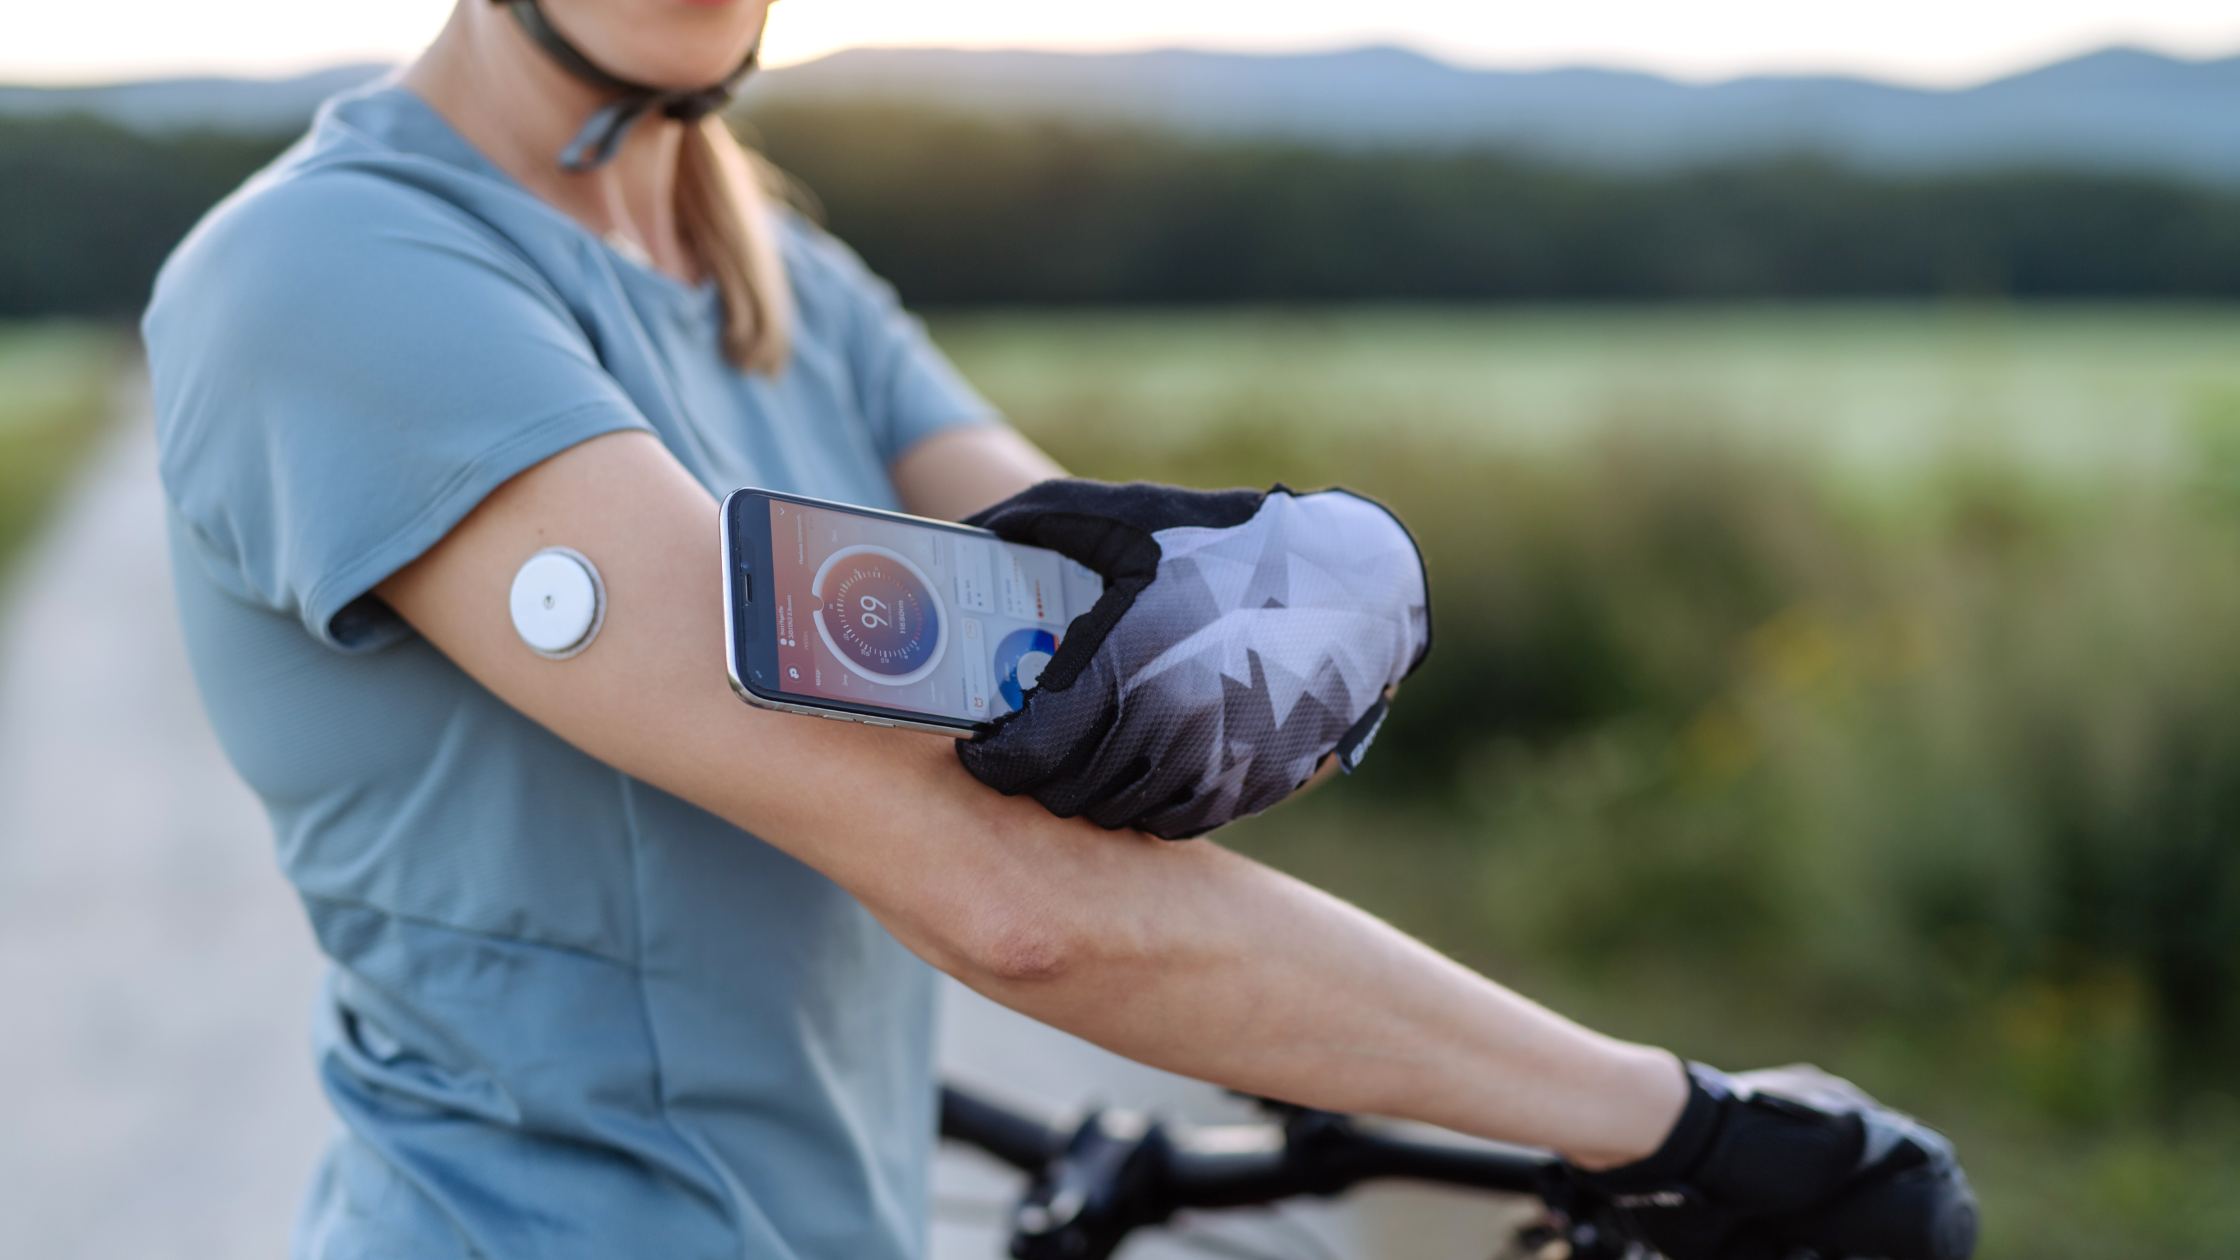 Man on bicycle checks blood glucose using continuous glucose monitoring device